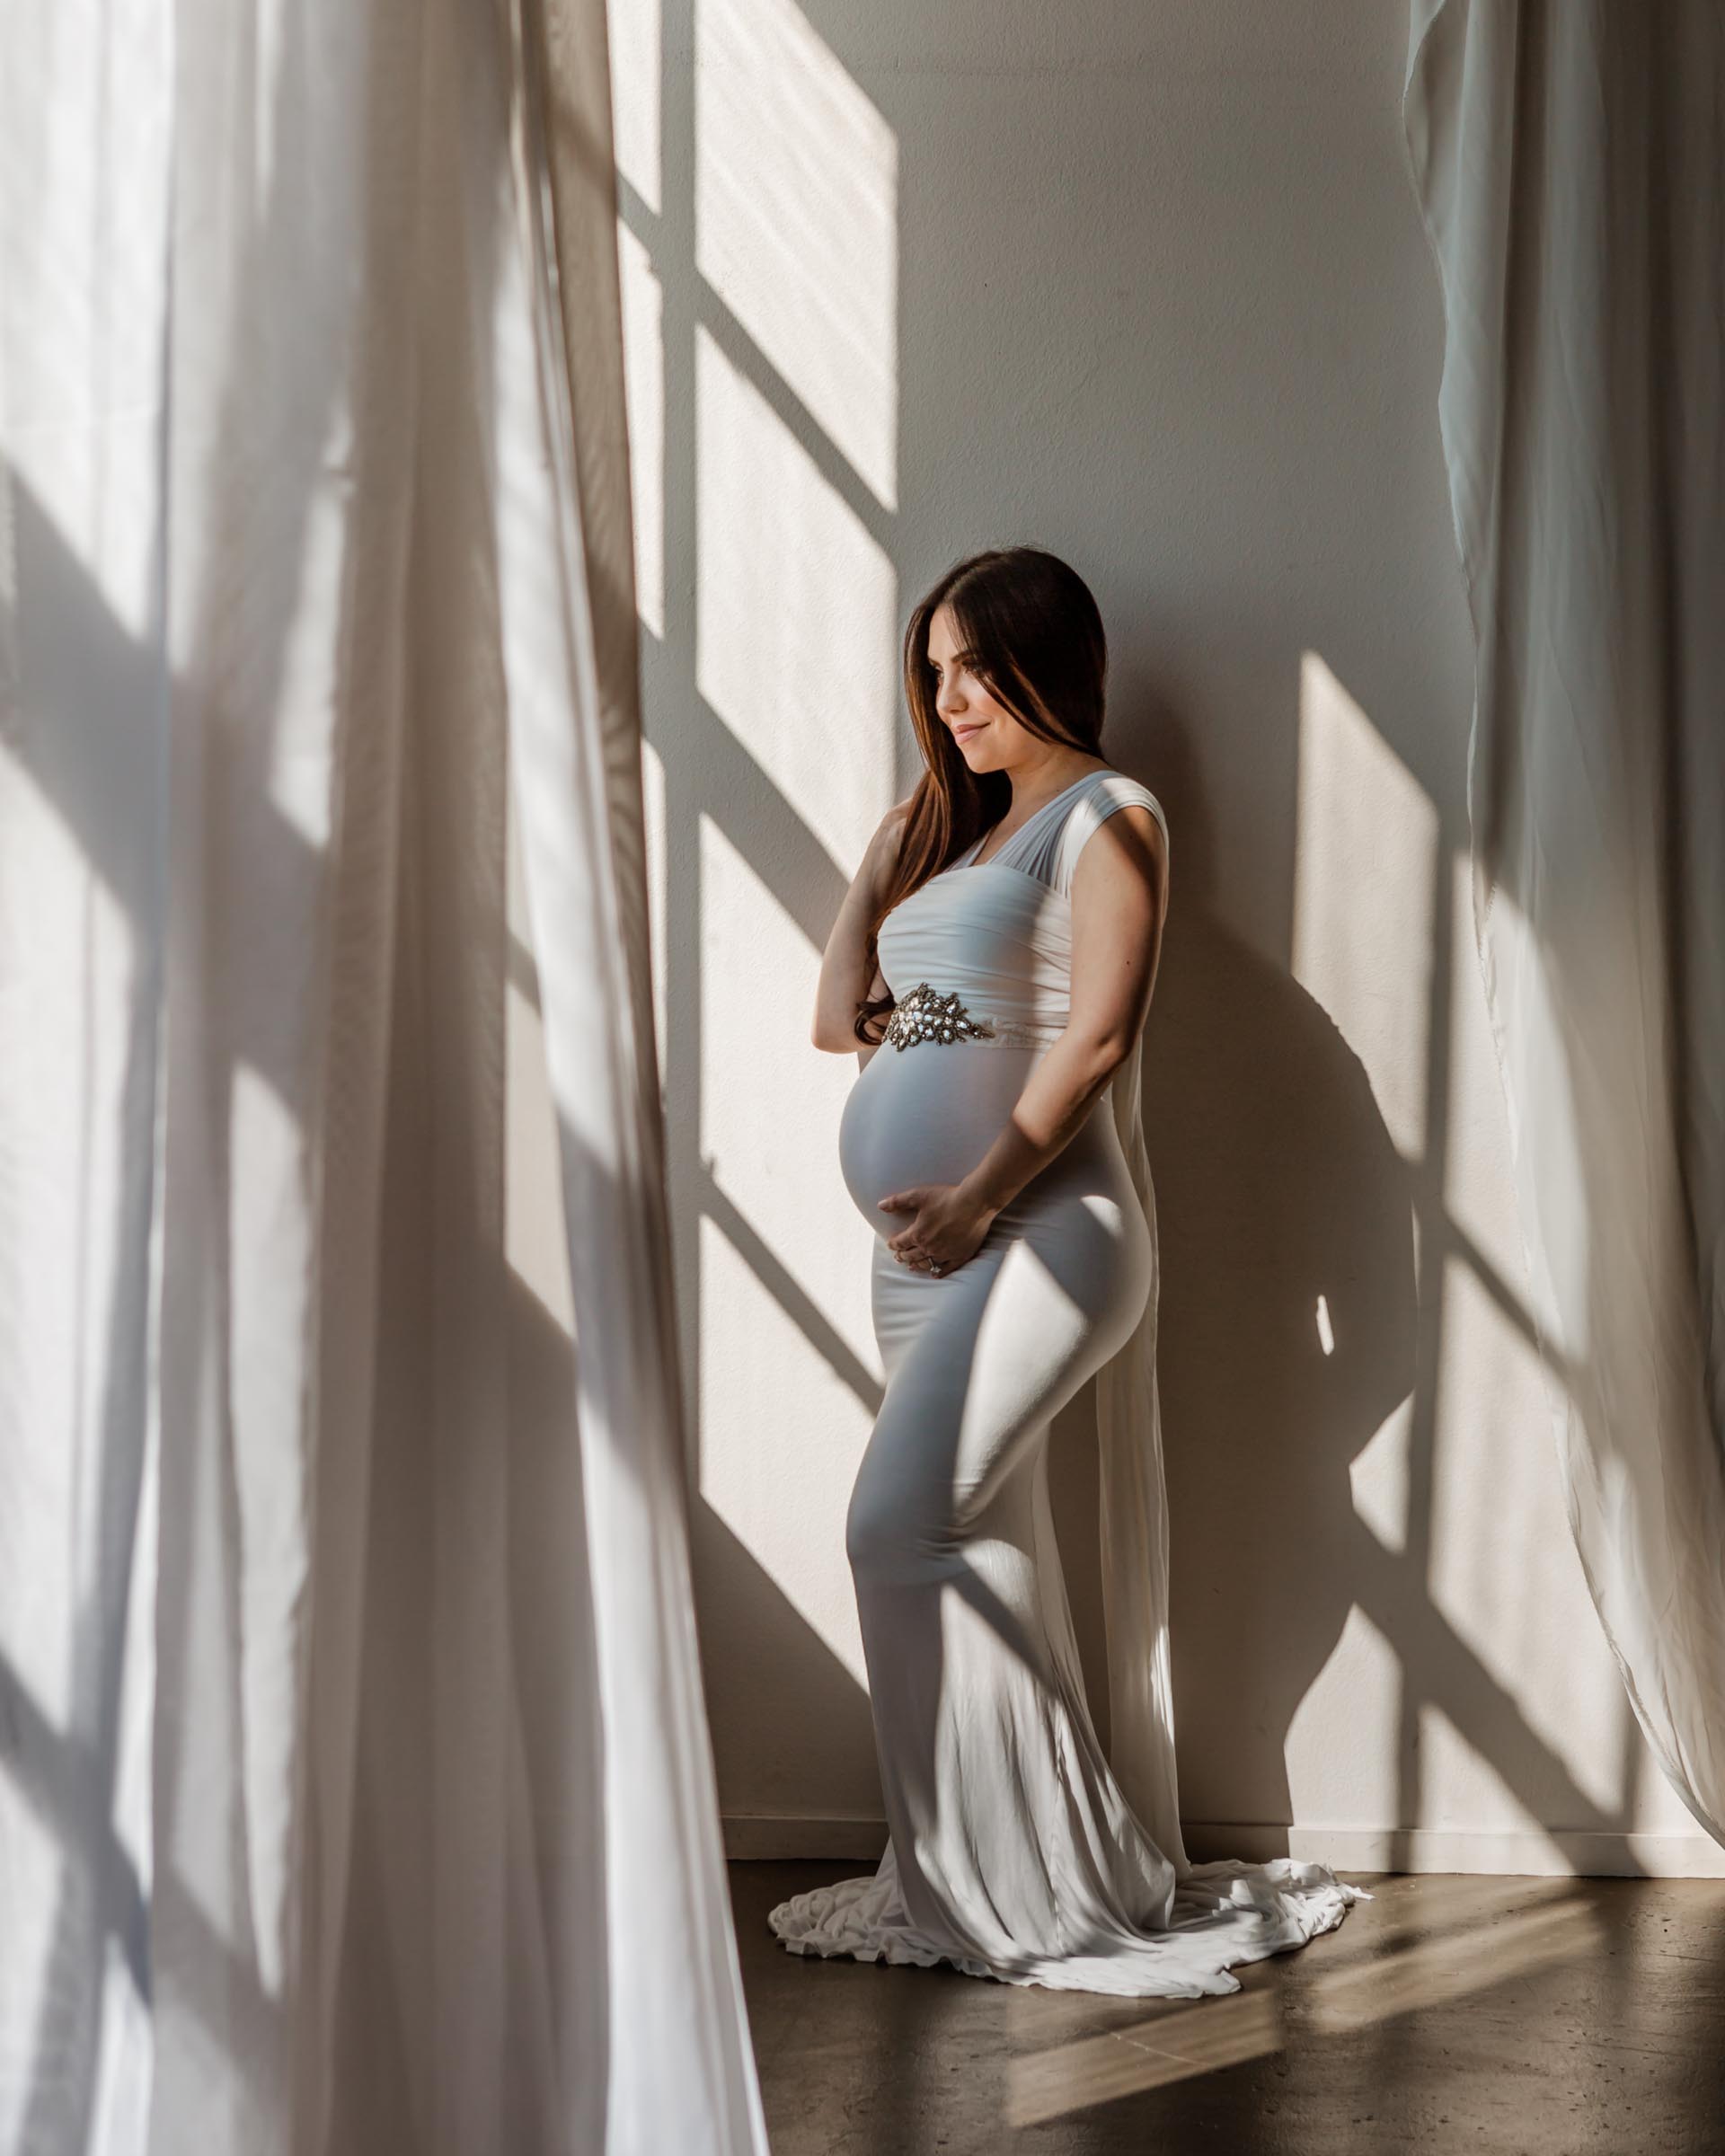 What Should I Wear to My Maternity Photoshoot? - Morning Light